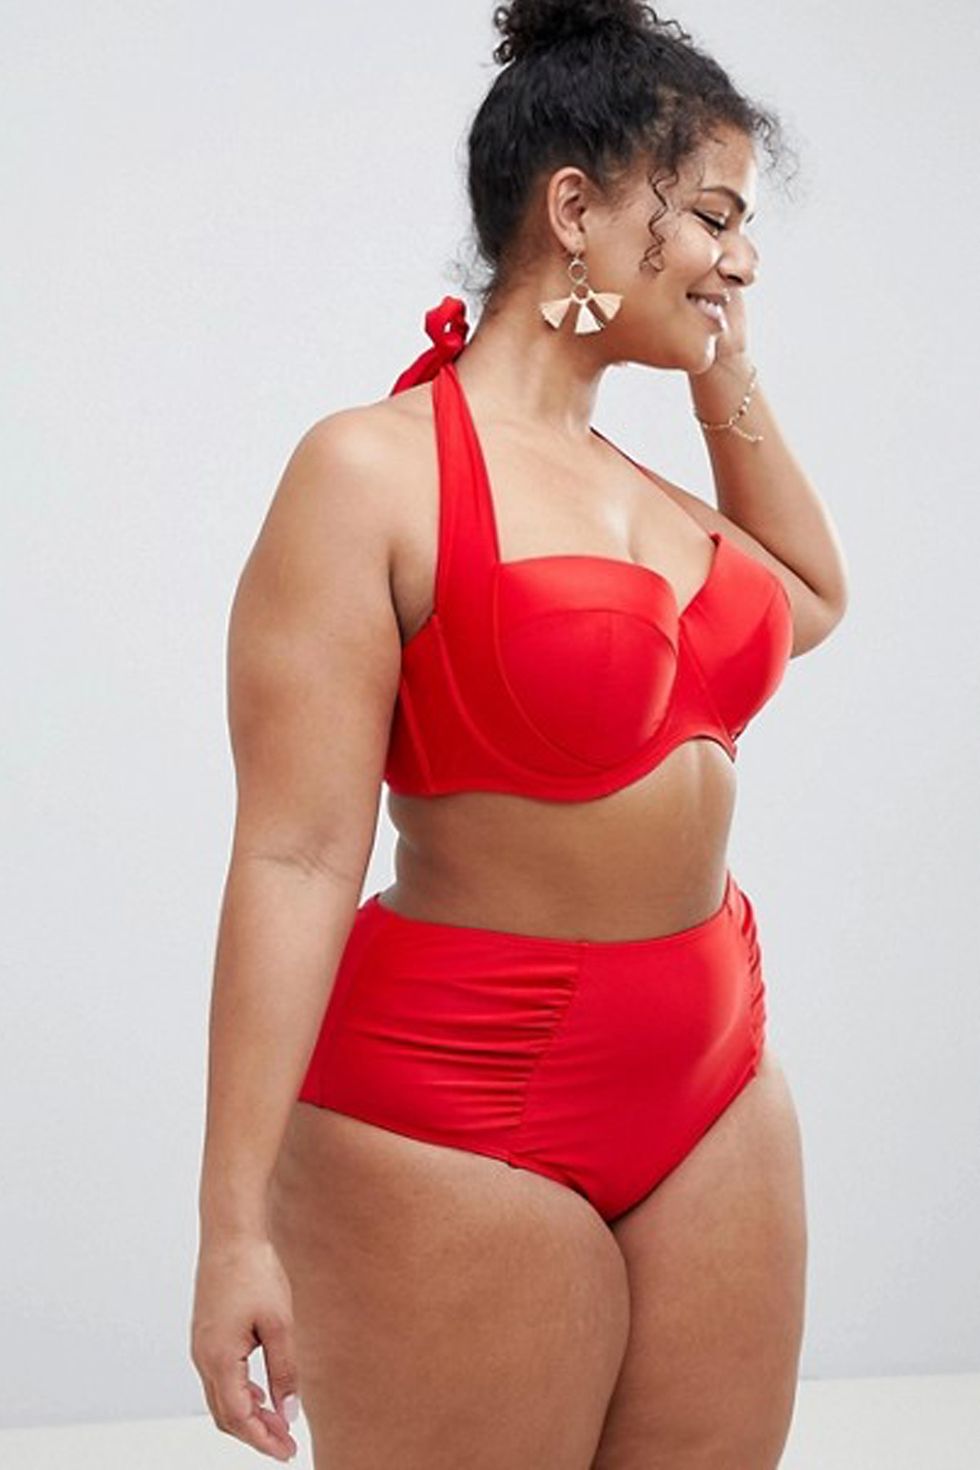 15Best Swimsuits for Women 2018 - Slimming Bathing Suits for All Body Types